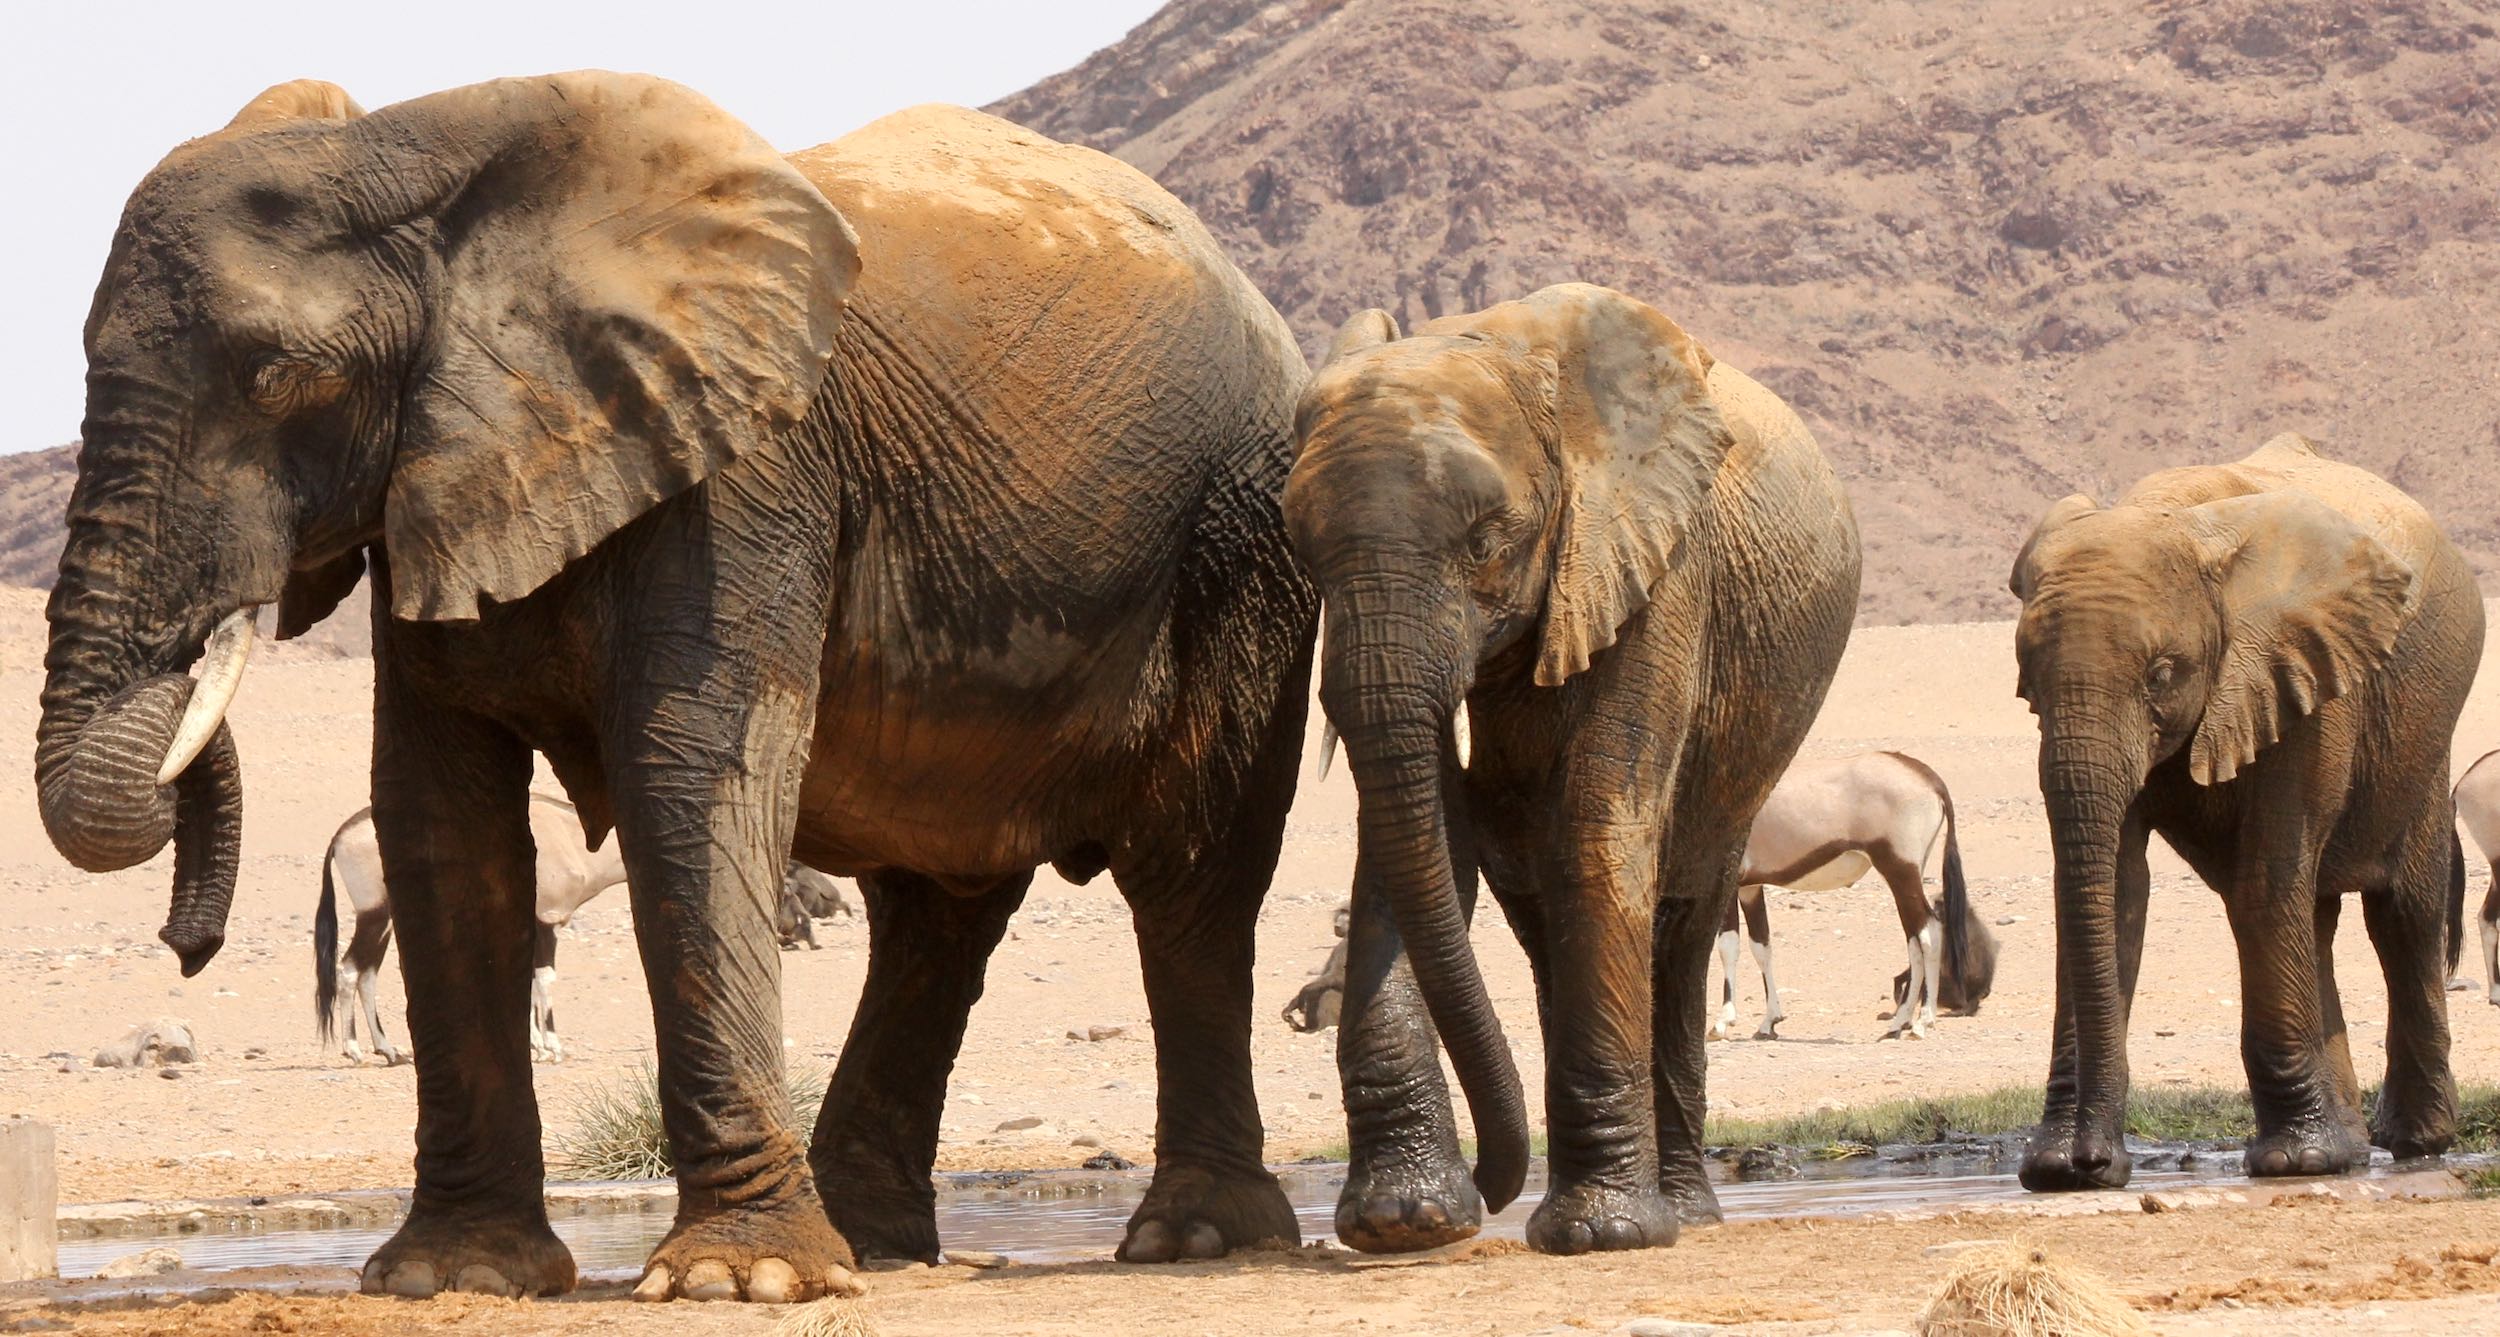 A group of elephants at a waterhole in the desert of NW Namibia.